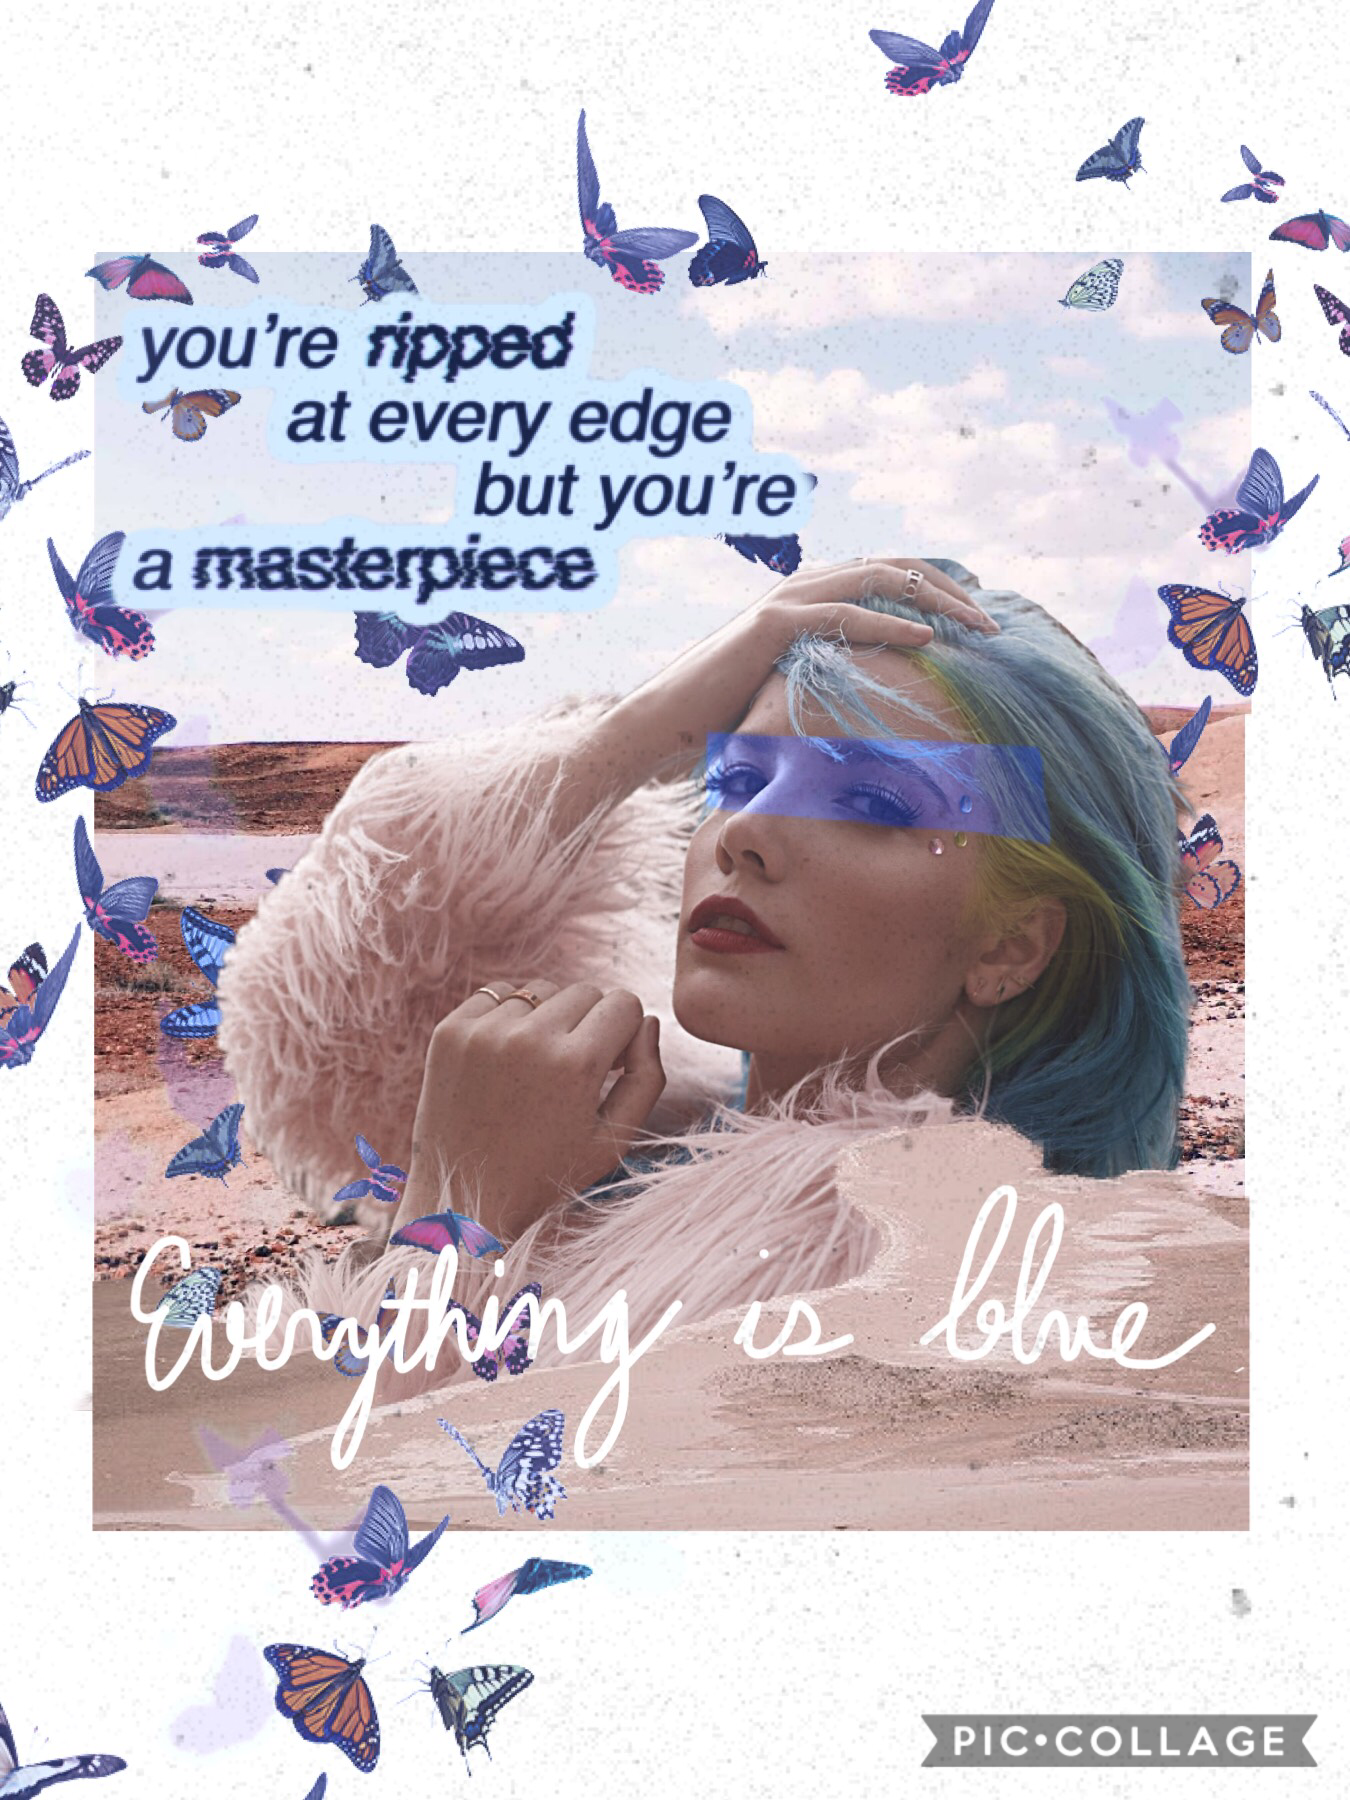 Idk but I did a Halsey collage🌊🦋🌬☁️


